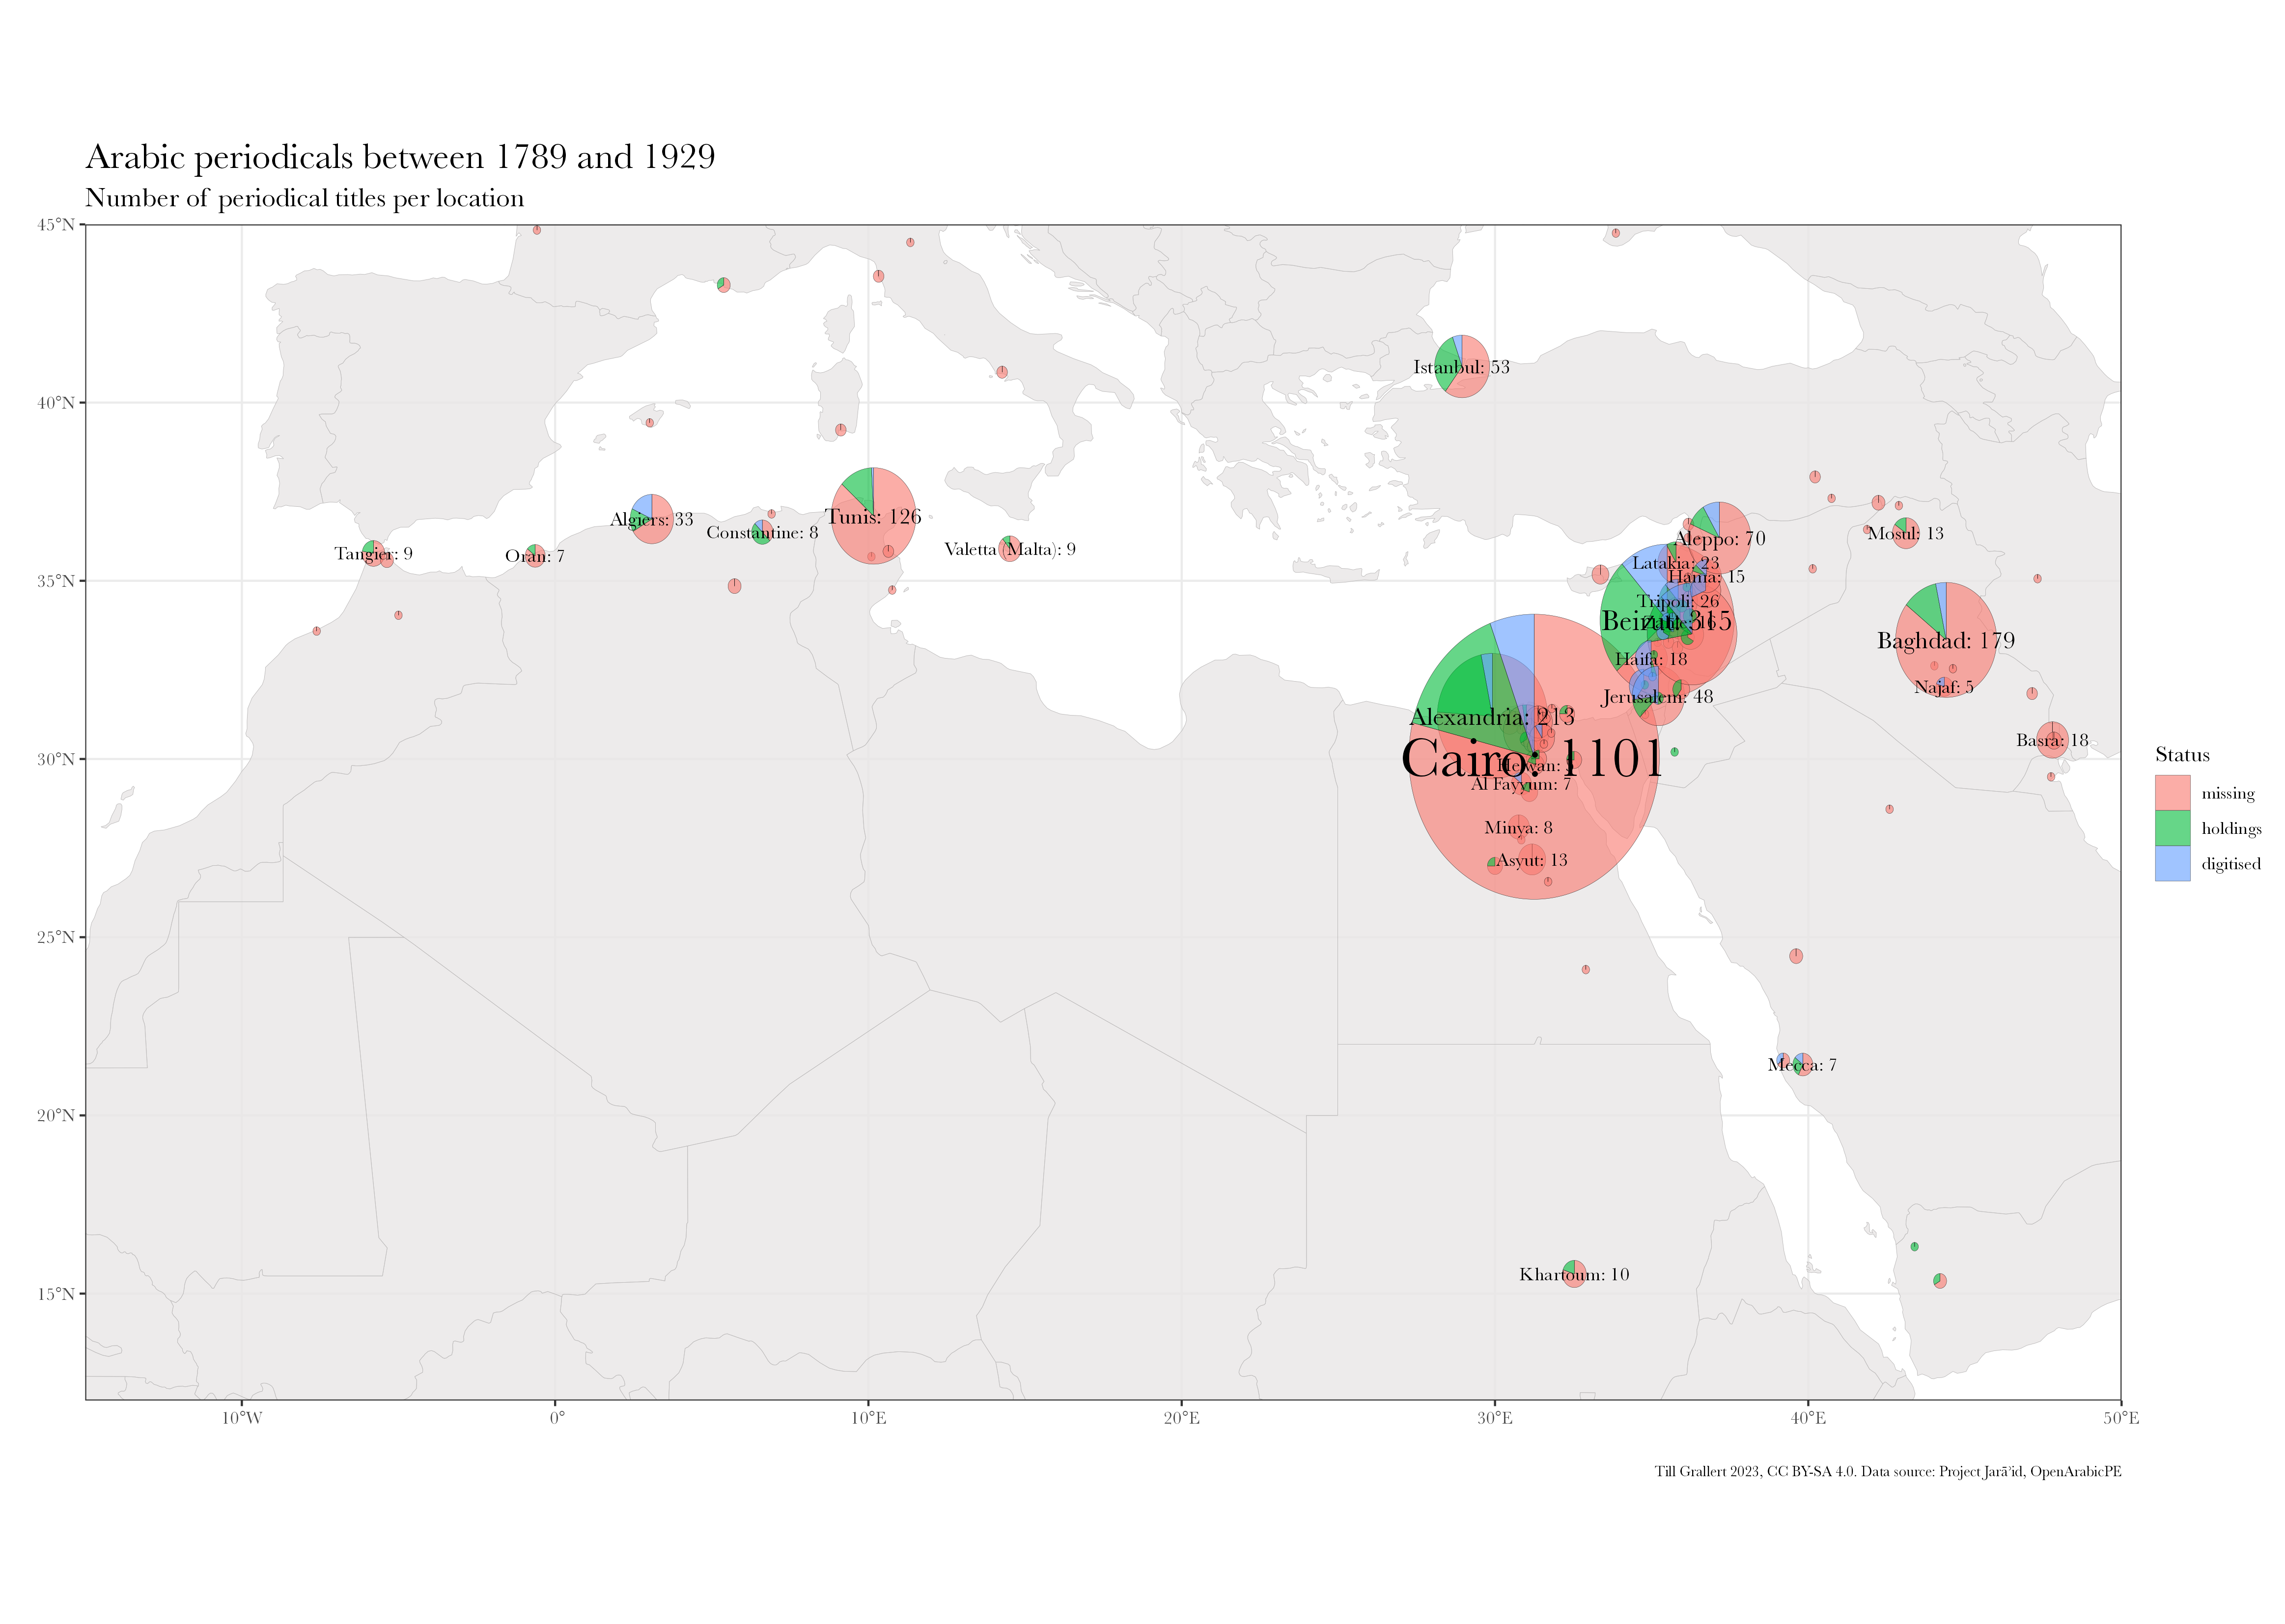 Geographic distribution of Arabic periodical titles published across South West Asia and North Africa (SWANA) between 1789–1929. The size of the pie charts corresponds to the total number of titles published at a location. Slices show the percentage of known holdings and digitized collections